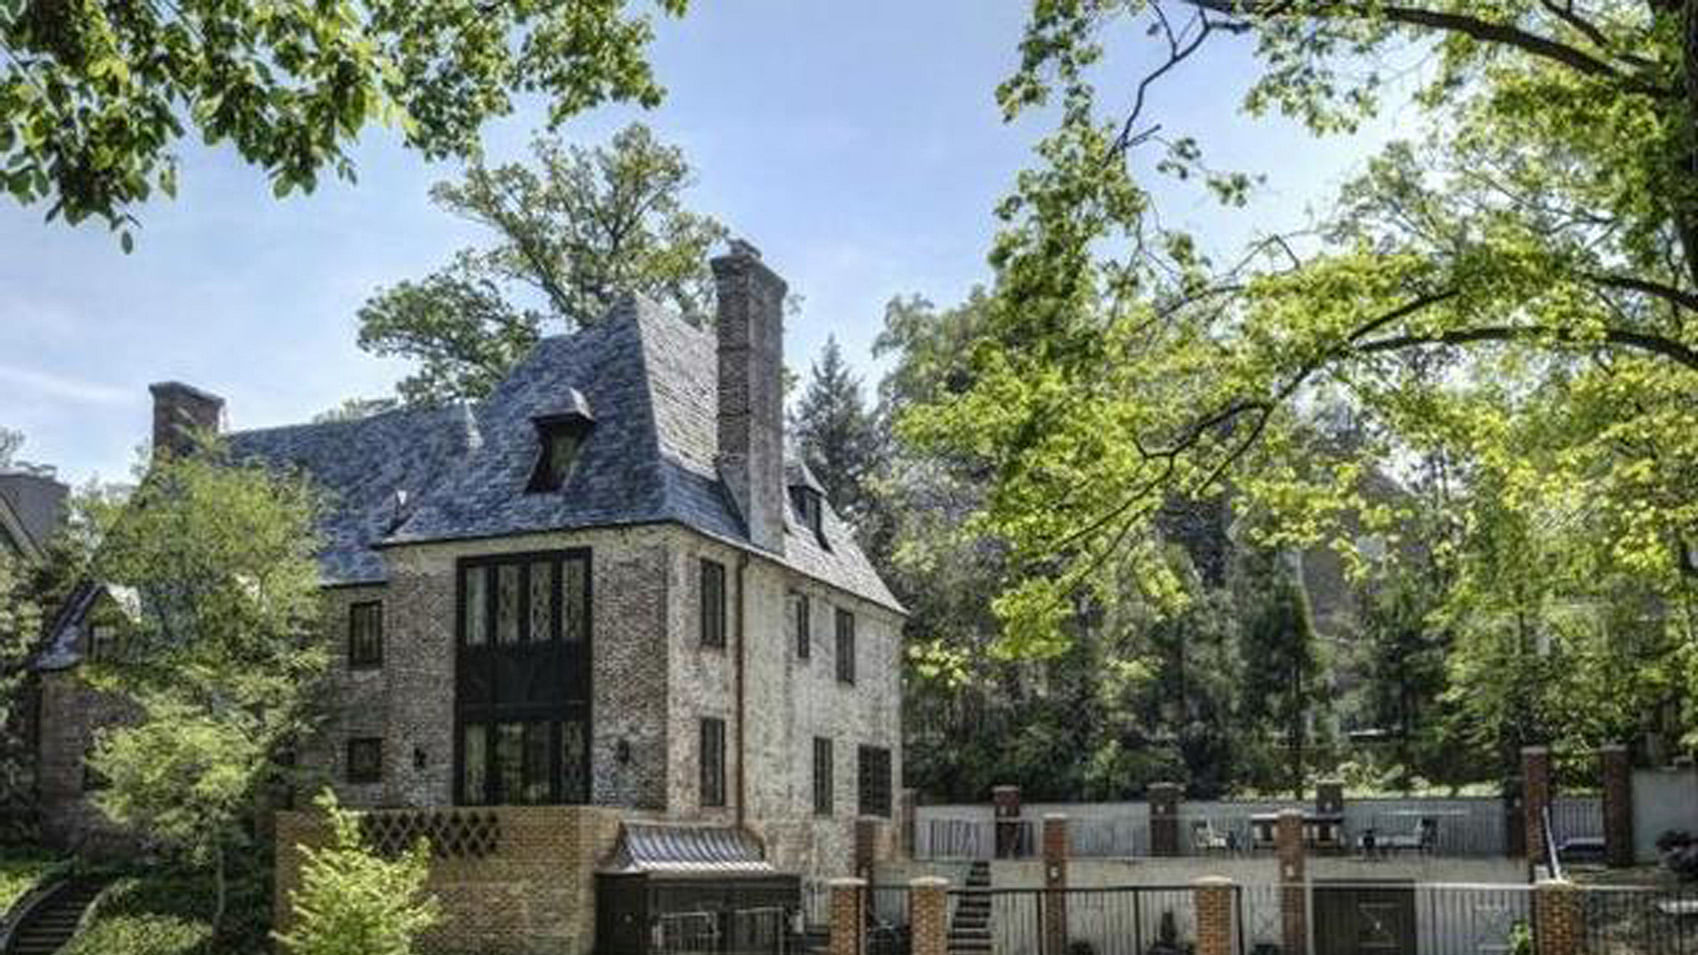 The lavish mansion  in Kalorama, Washington where the Obamas will reside after leaving the White House next year. (Photo Courtesy: Redfin)